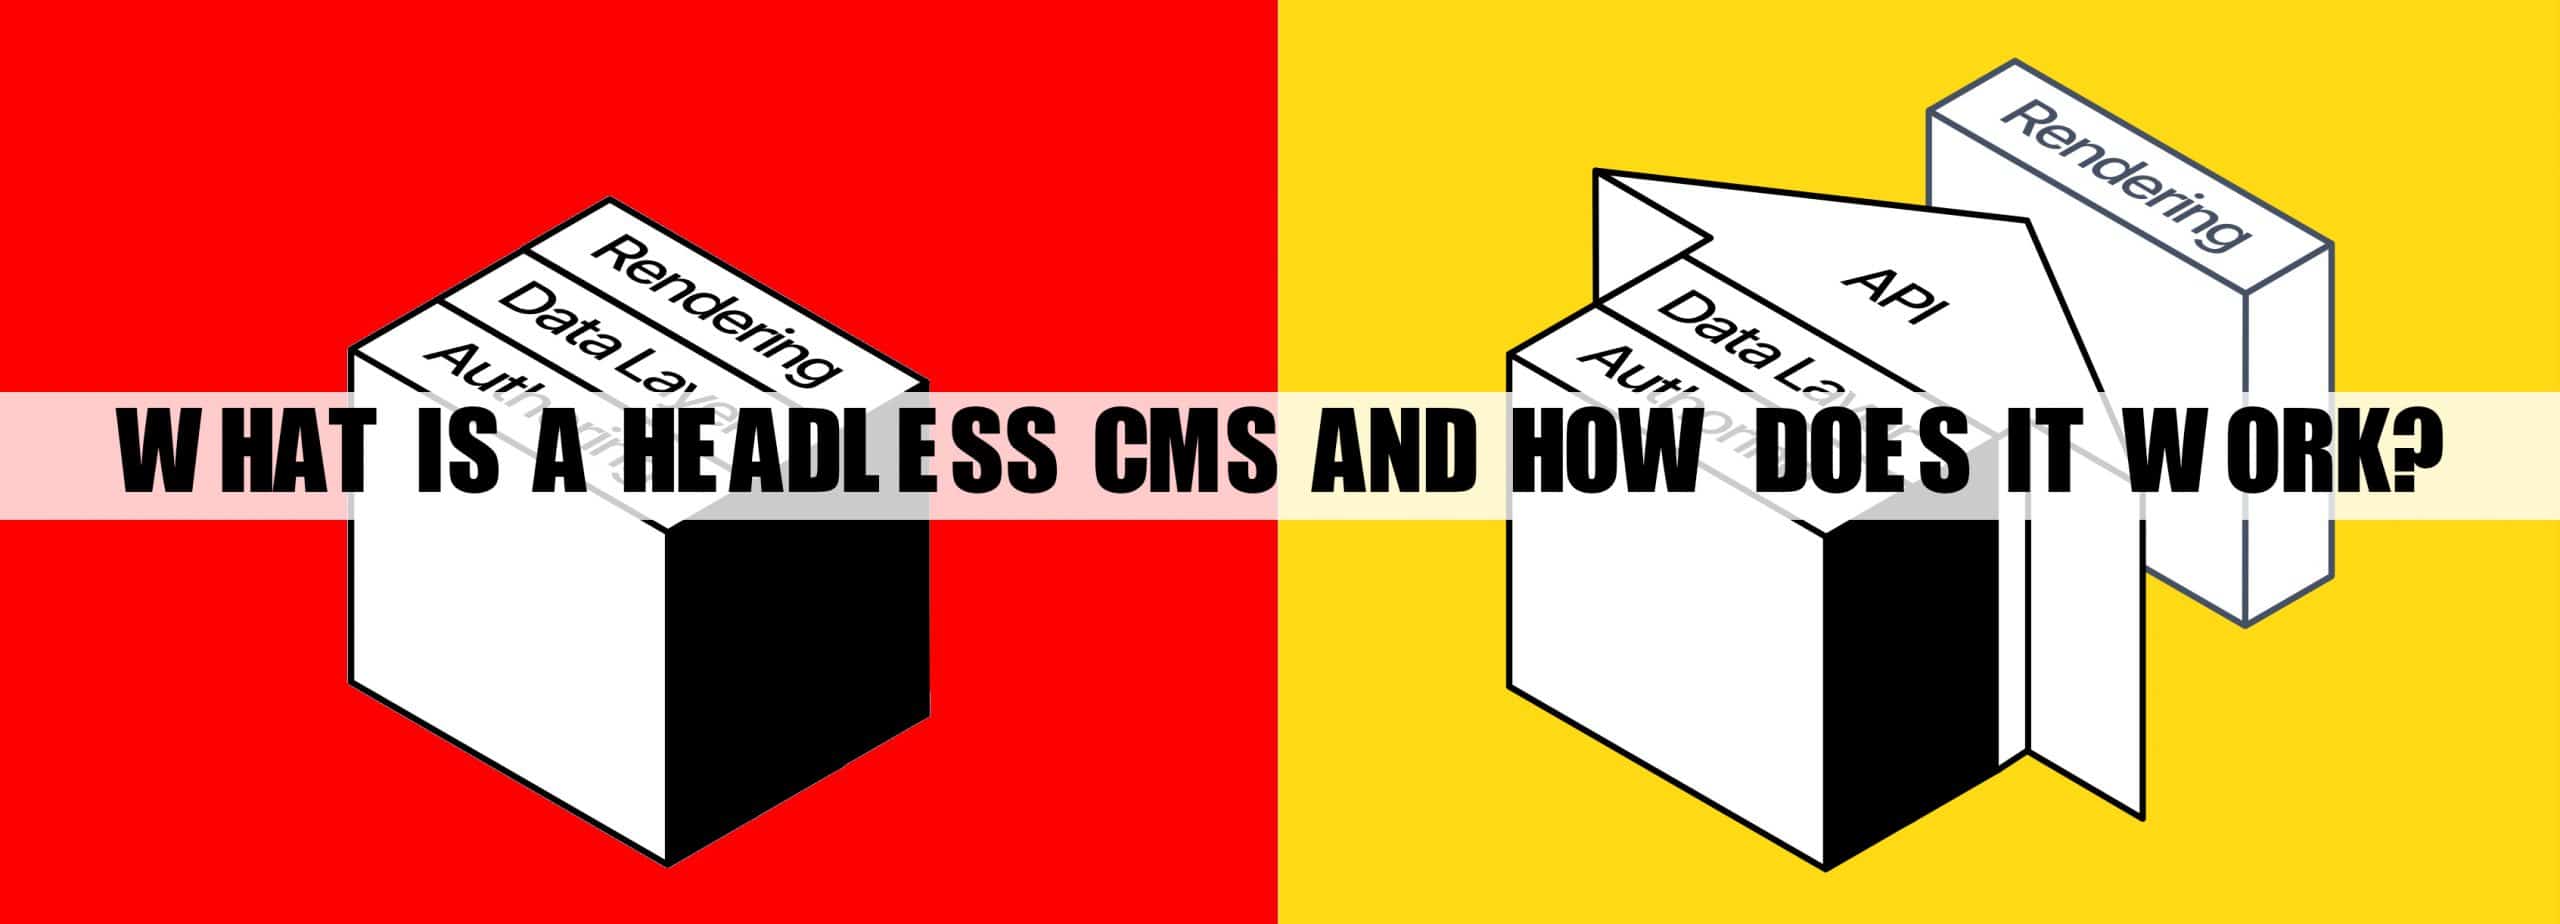 What Is a Headless CMS and How Does It Work?